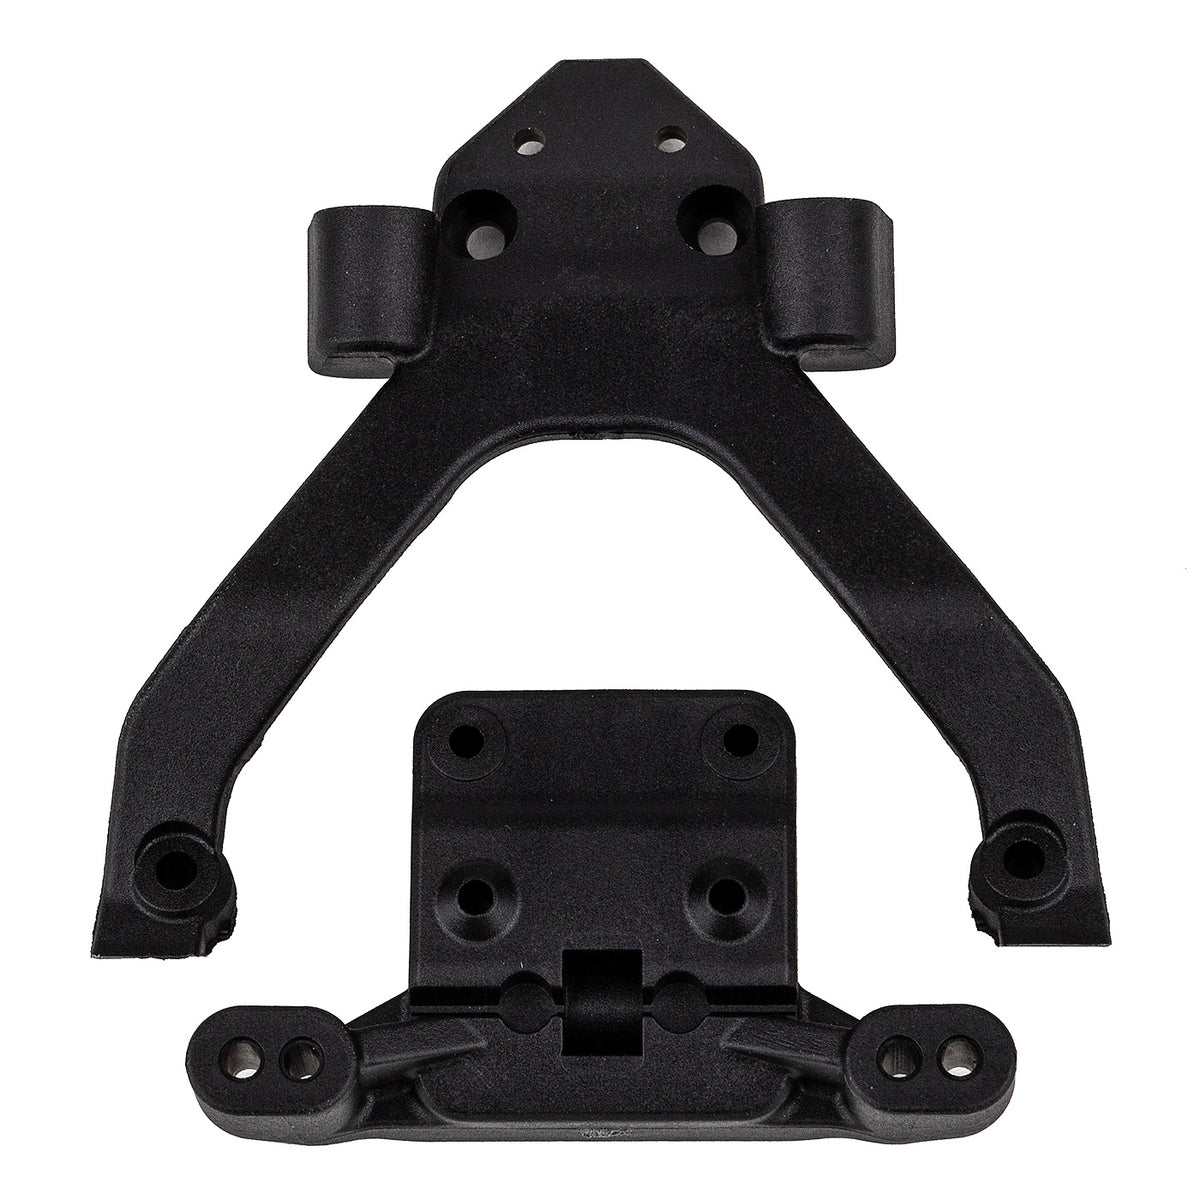 Team Associated B6.4 Angled Top Plate and Ballstud Mount